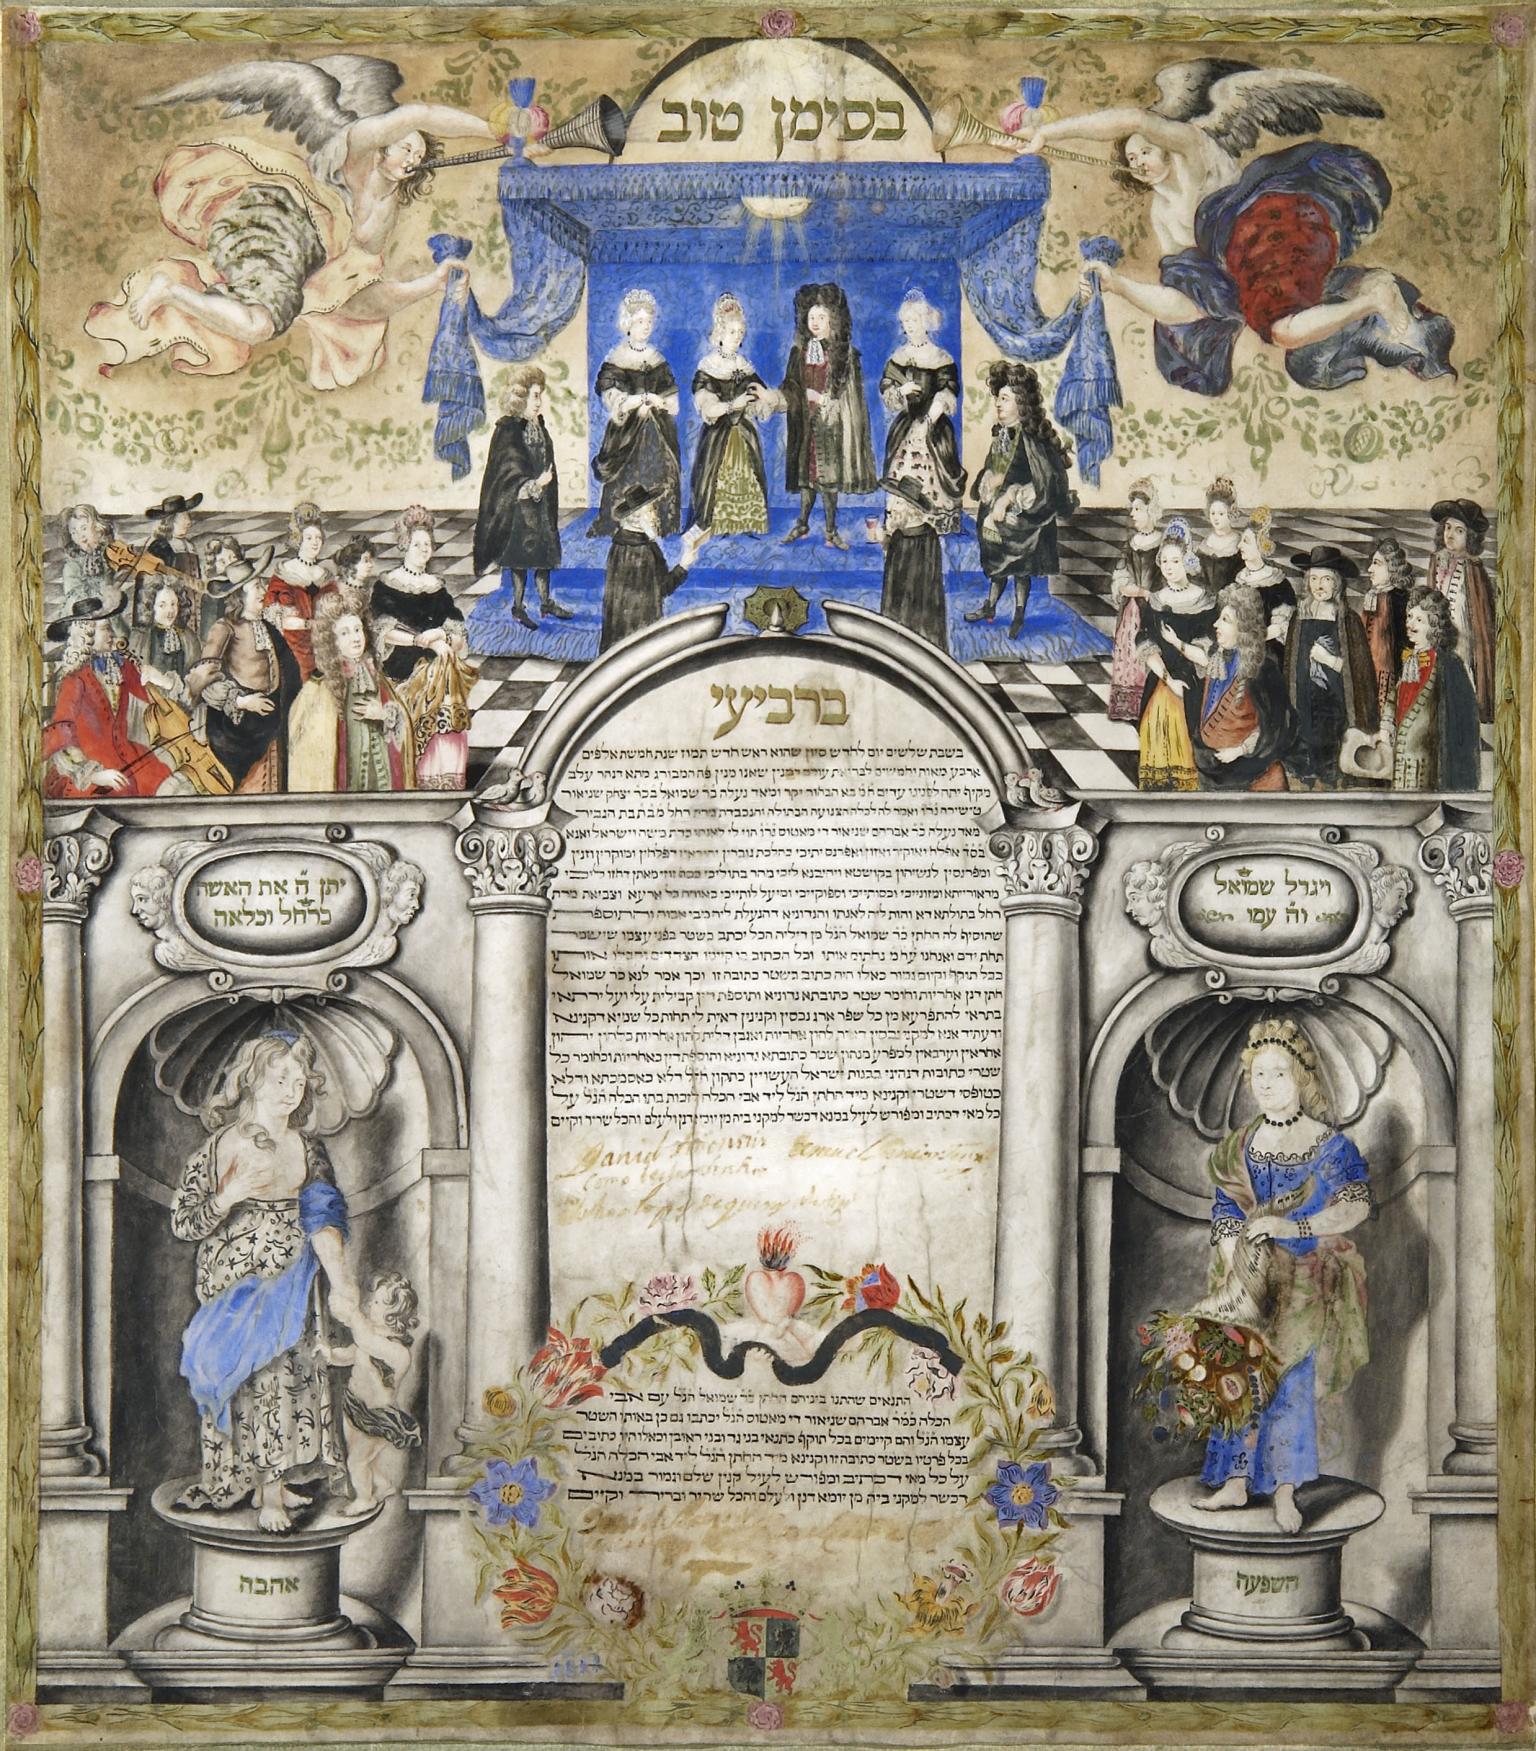 Page of Aramaic text surrounded by ornate illustrations, including couple under wedding canopy at the top of the page with many well-dressed people around them and two angels flying overhead, and two women on pedestals on either side of the bottom of the page on either side of a wreath with text inside. 